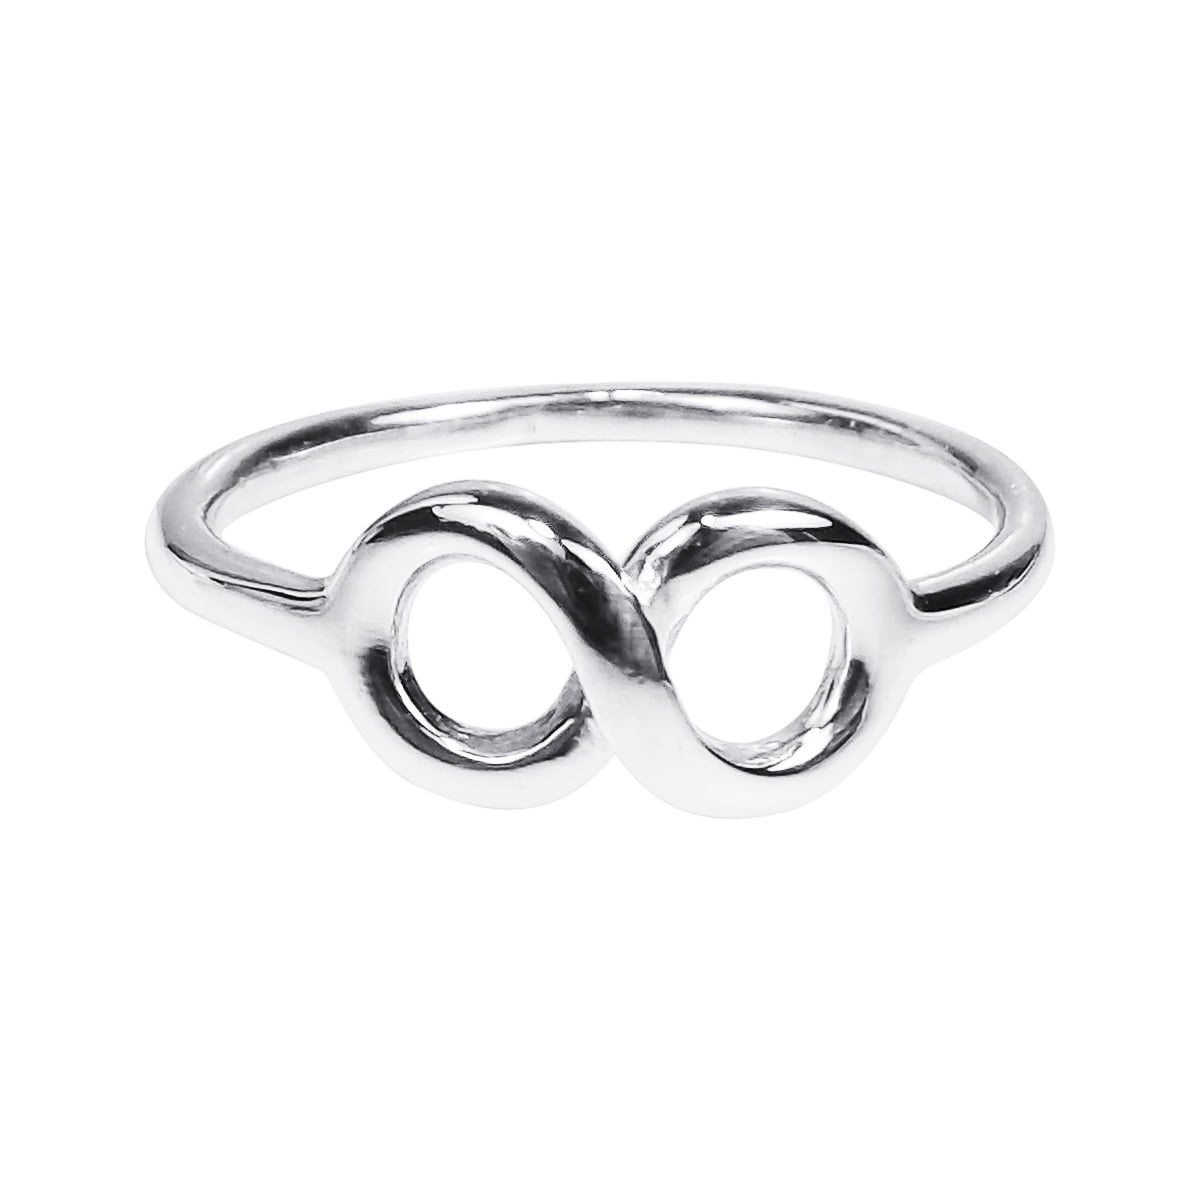 Endless Love Knot Infinity Symbol Sterling Silver Ring-9